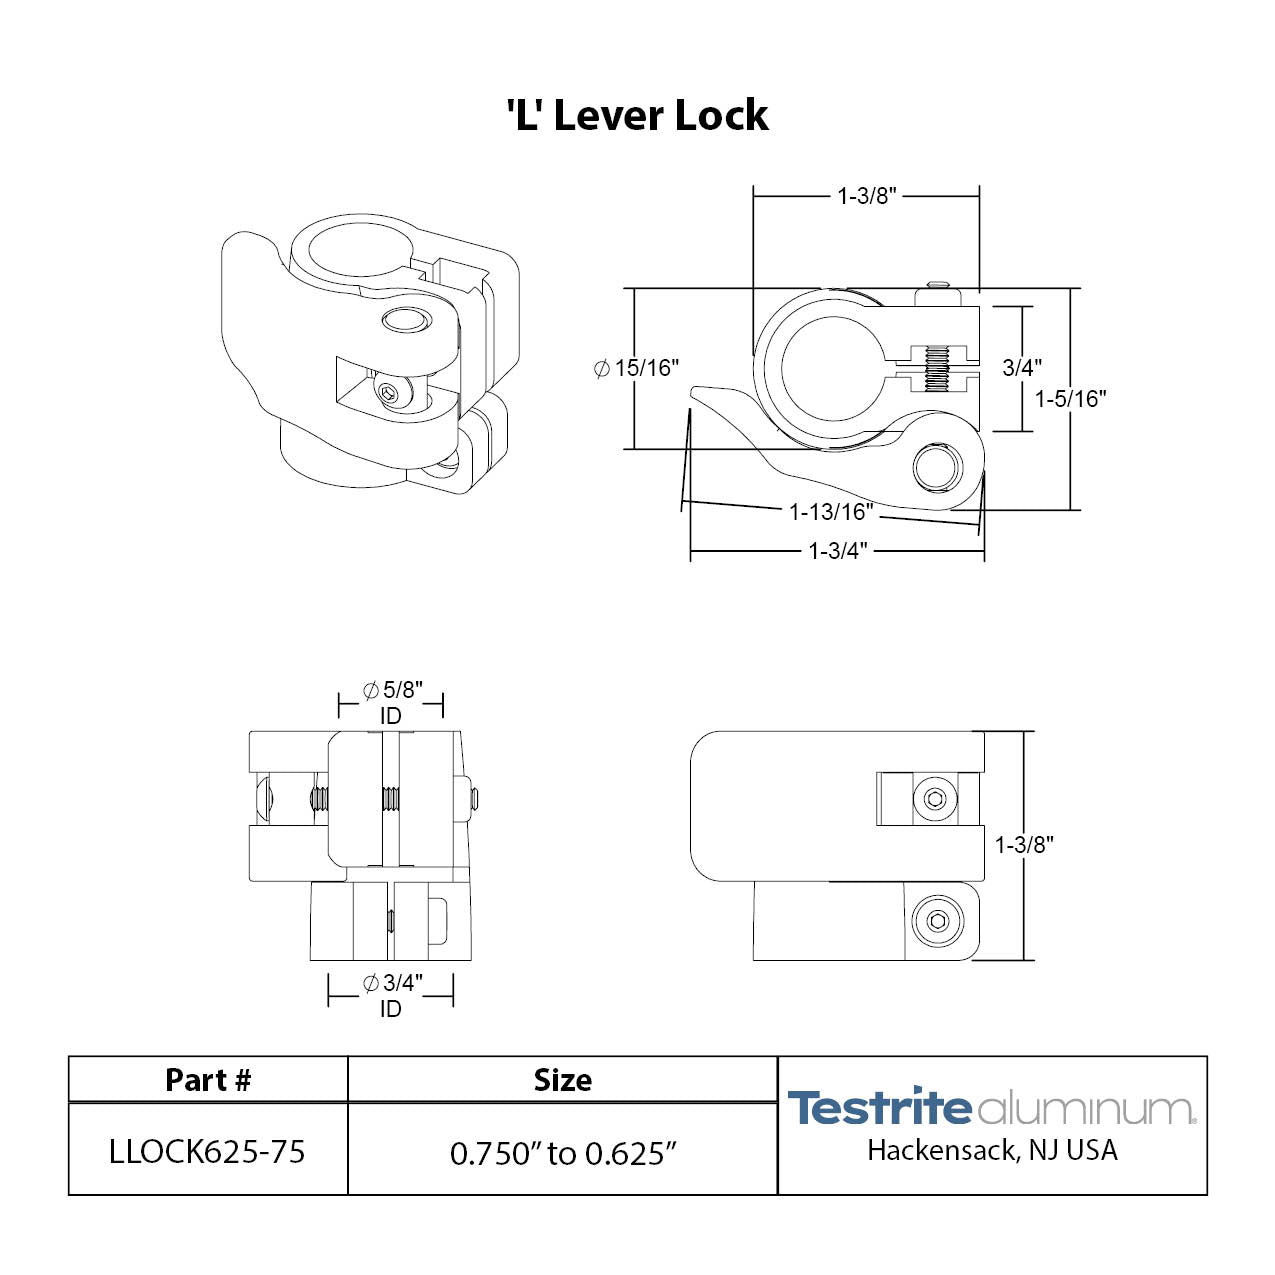 Specification sheet for LLOCK0625-0750, Telescopic Tubing Lock for 5/8" to 3/4"